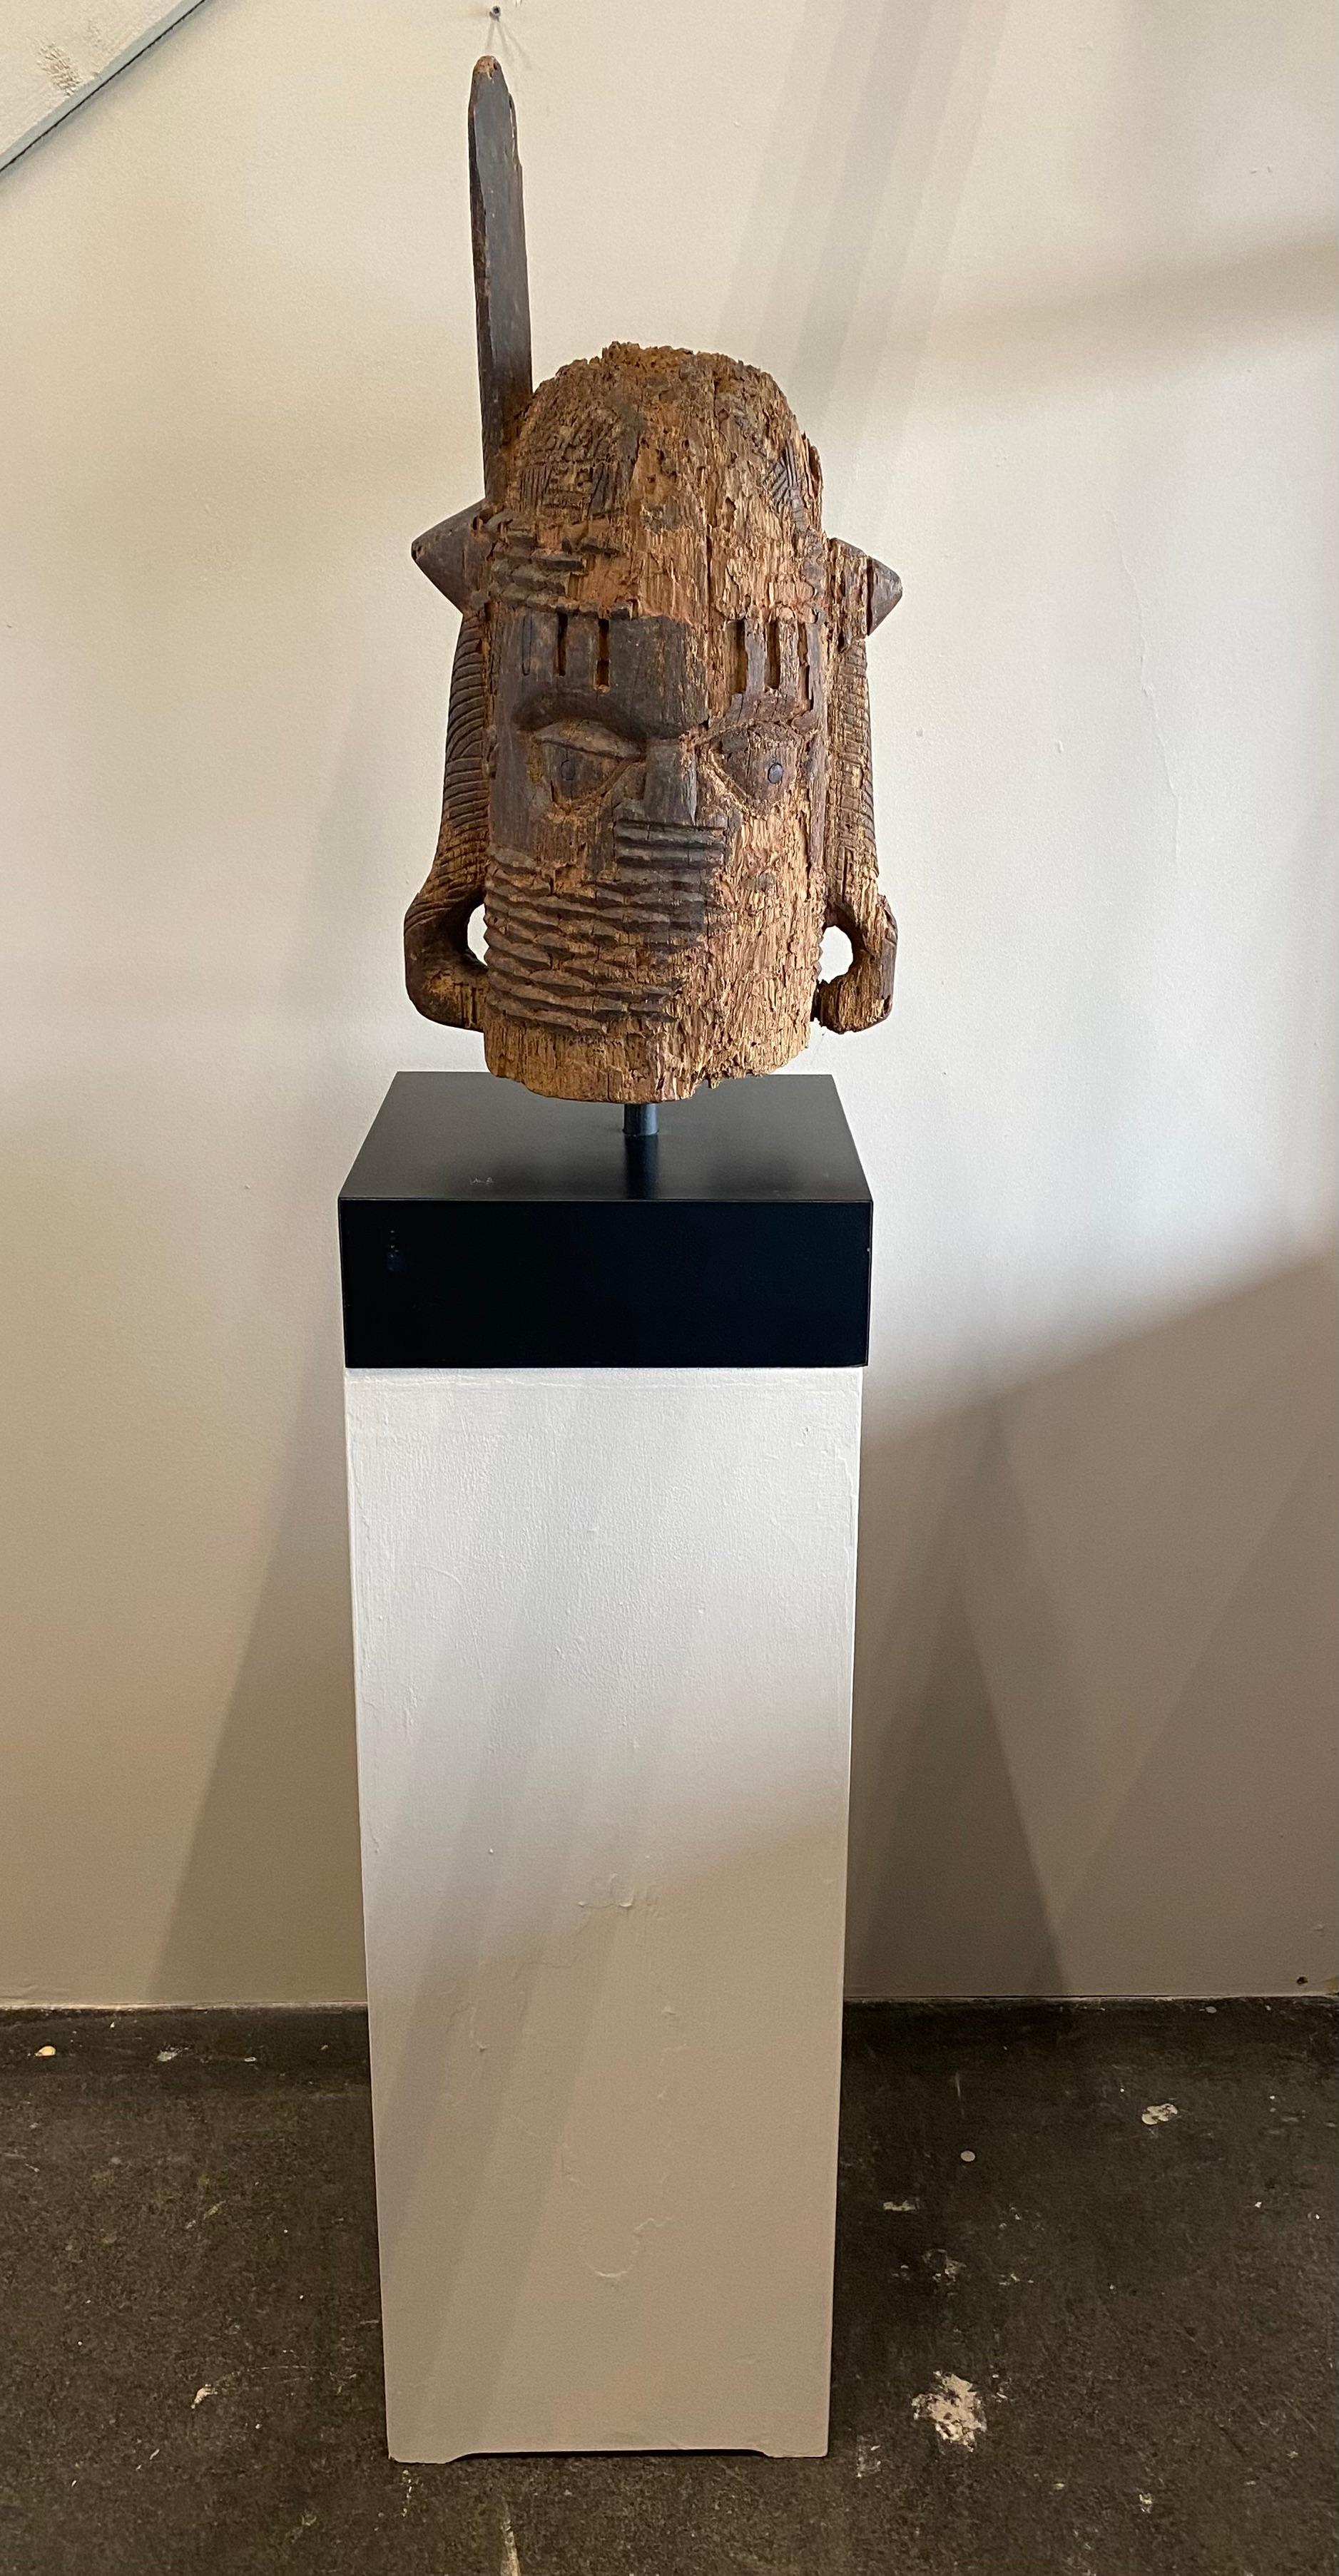 Carved from reddish brown hardwood, the hollow form rises from a cylindrical neck, the lowest part being a rounded base, then surrounded by diagonal sections. The neck is surrounded by nine rows of coral beaded necklaces (odigba) that extend to a